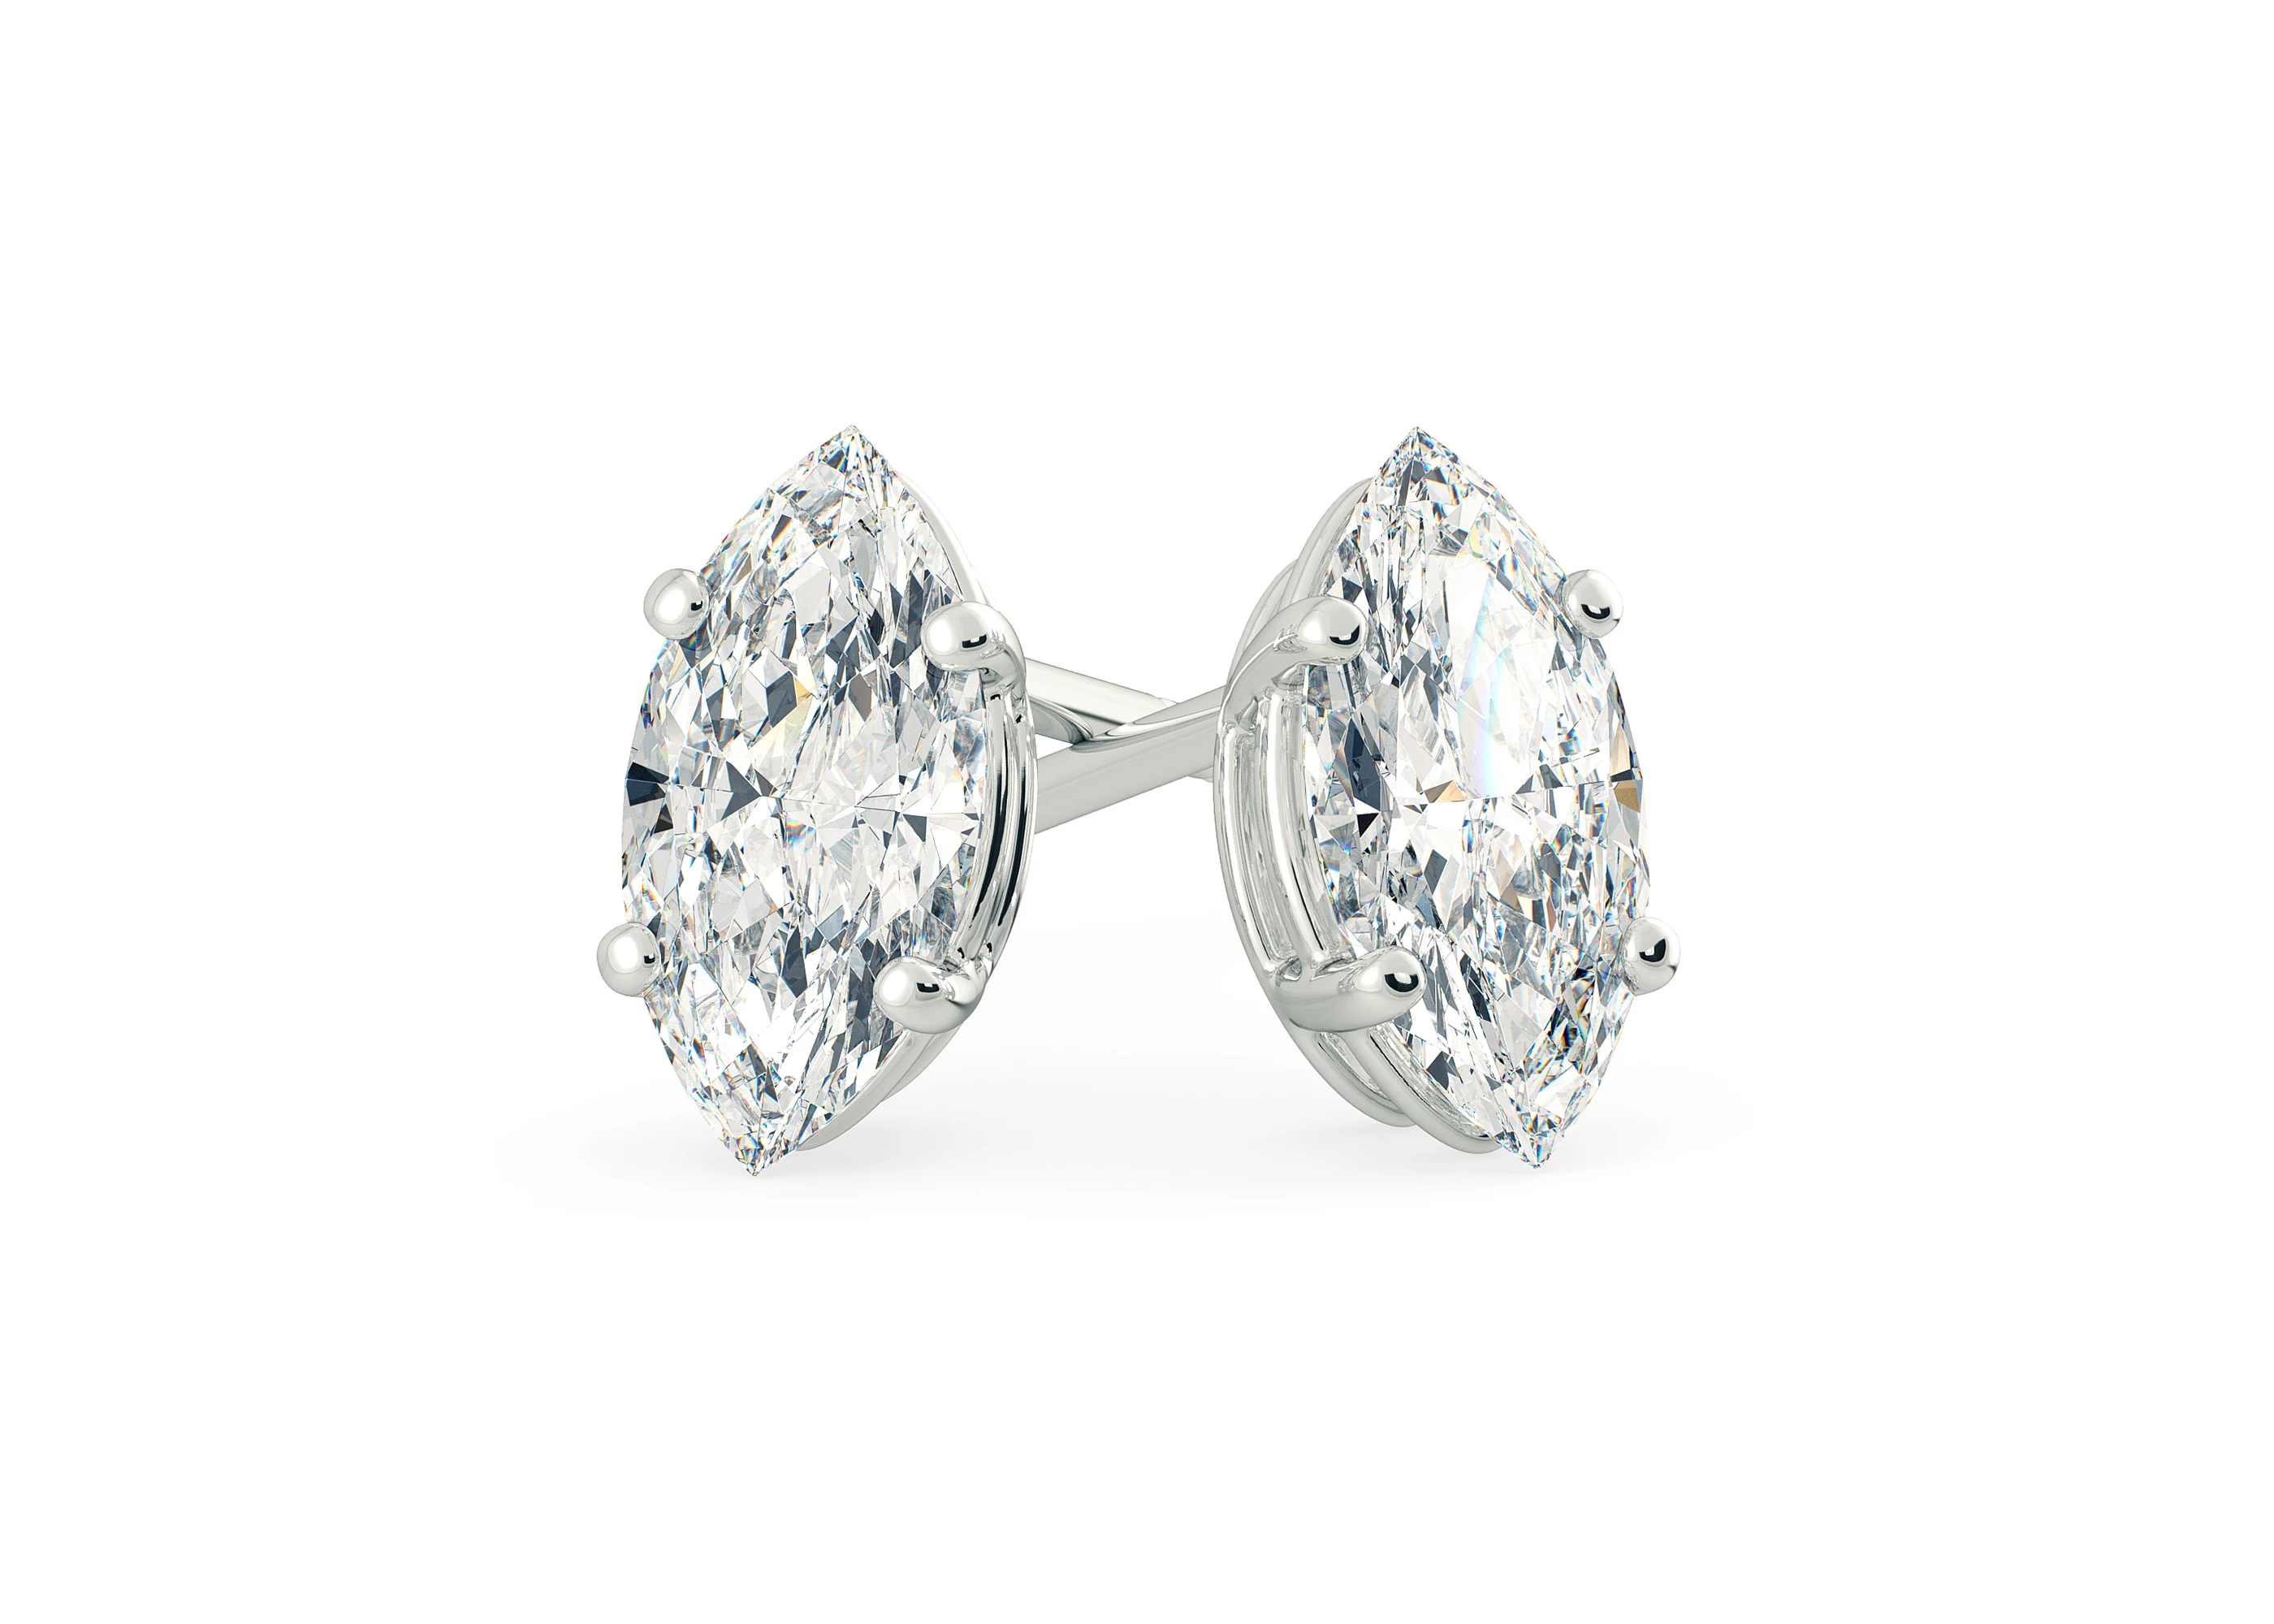 Ettore Marquise Diamond Stud Earrings in Platinum with Butterfly Backs